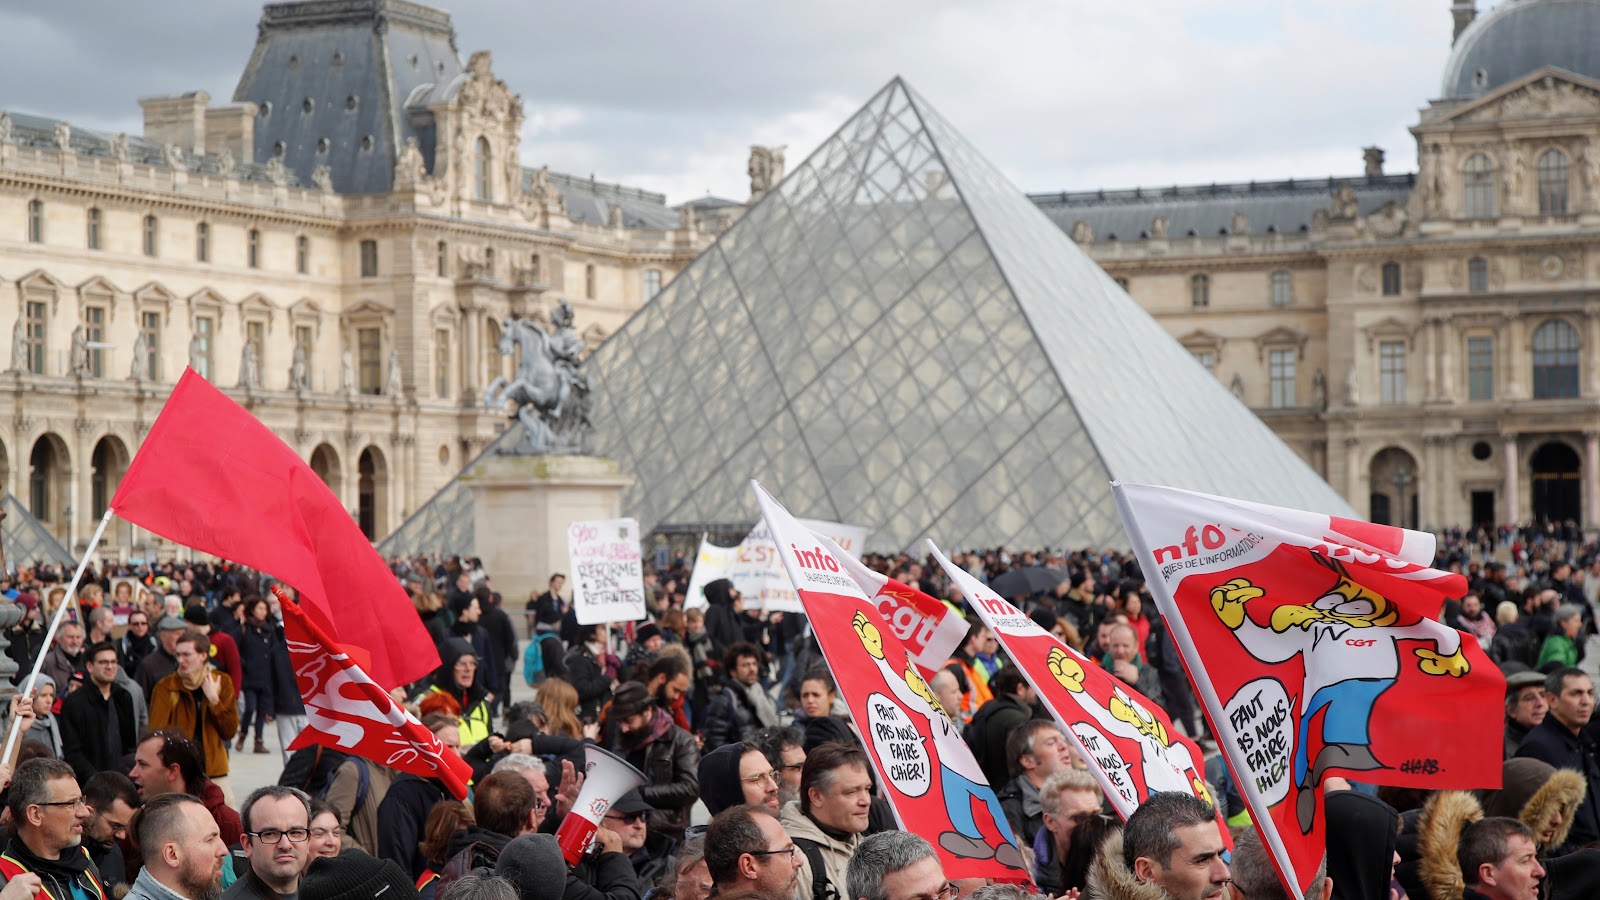 <u>Query</u>: People protesting outside the most visited museum in France<br>
      <u>Named Entity</u>: Louvre Museum